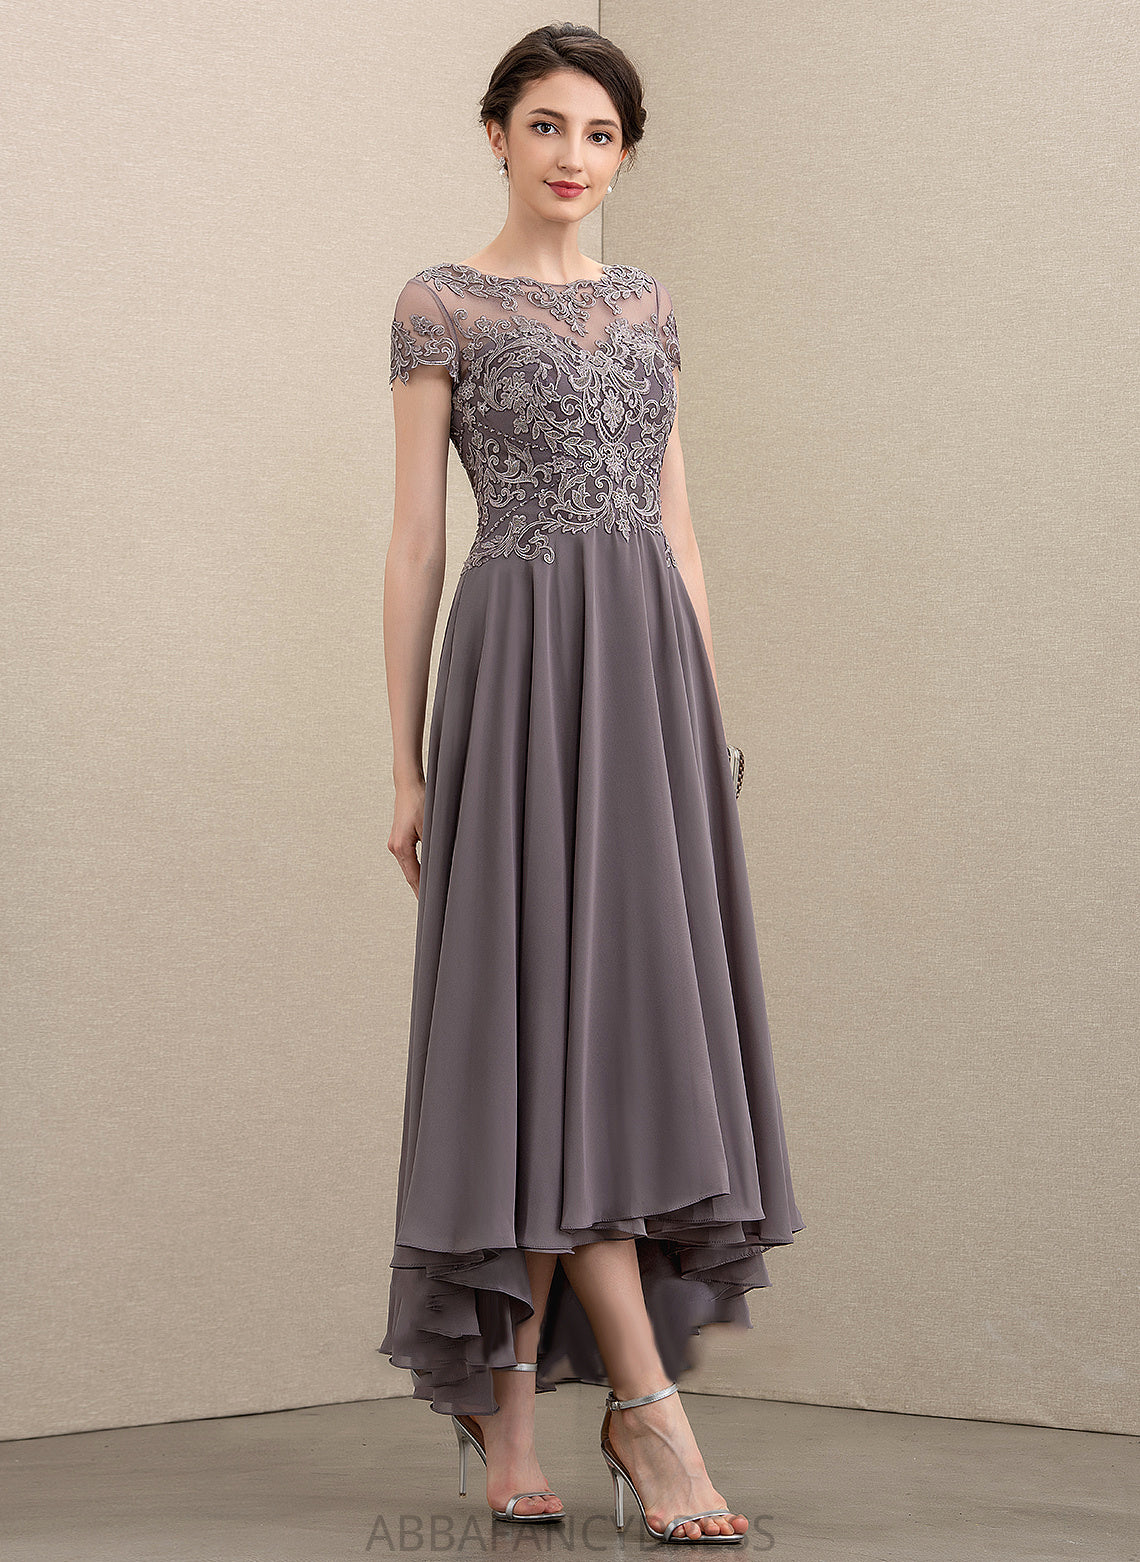 the Mother of the Bride Dresses Asymmetrical of A-Line Dress Sequins Mother Beading With Pam Neck Scoop Chiffon Lace Bride